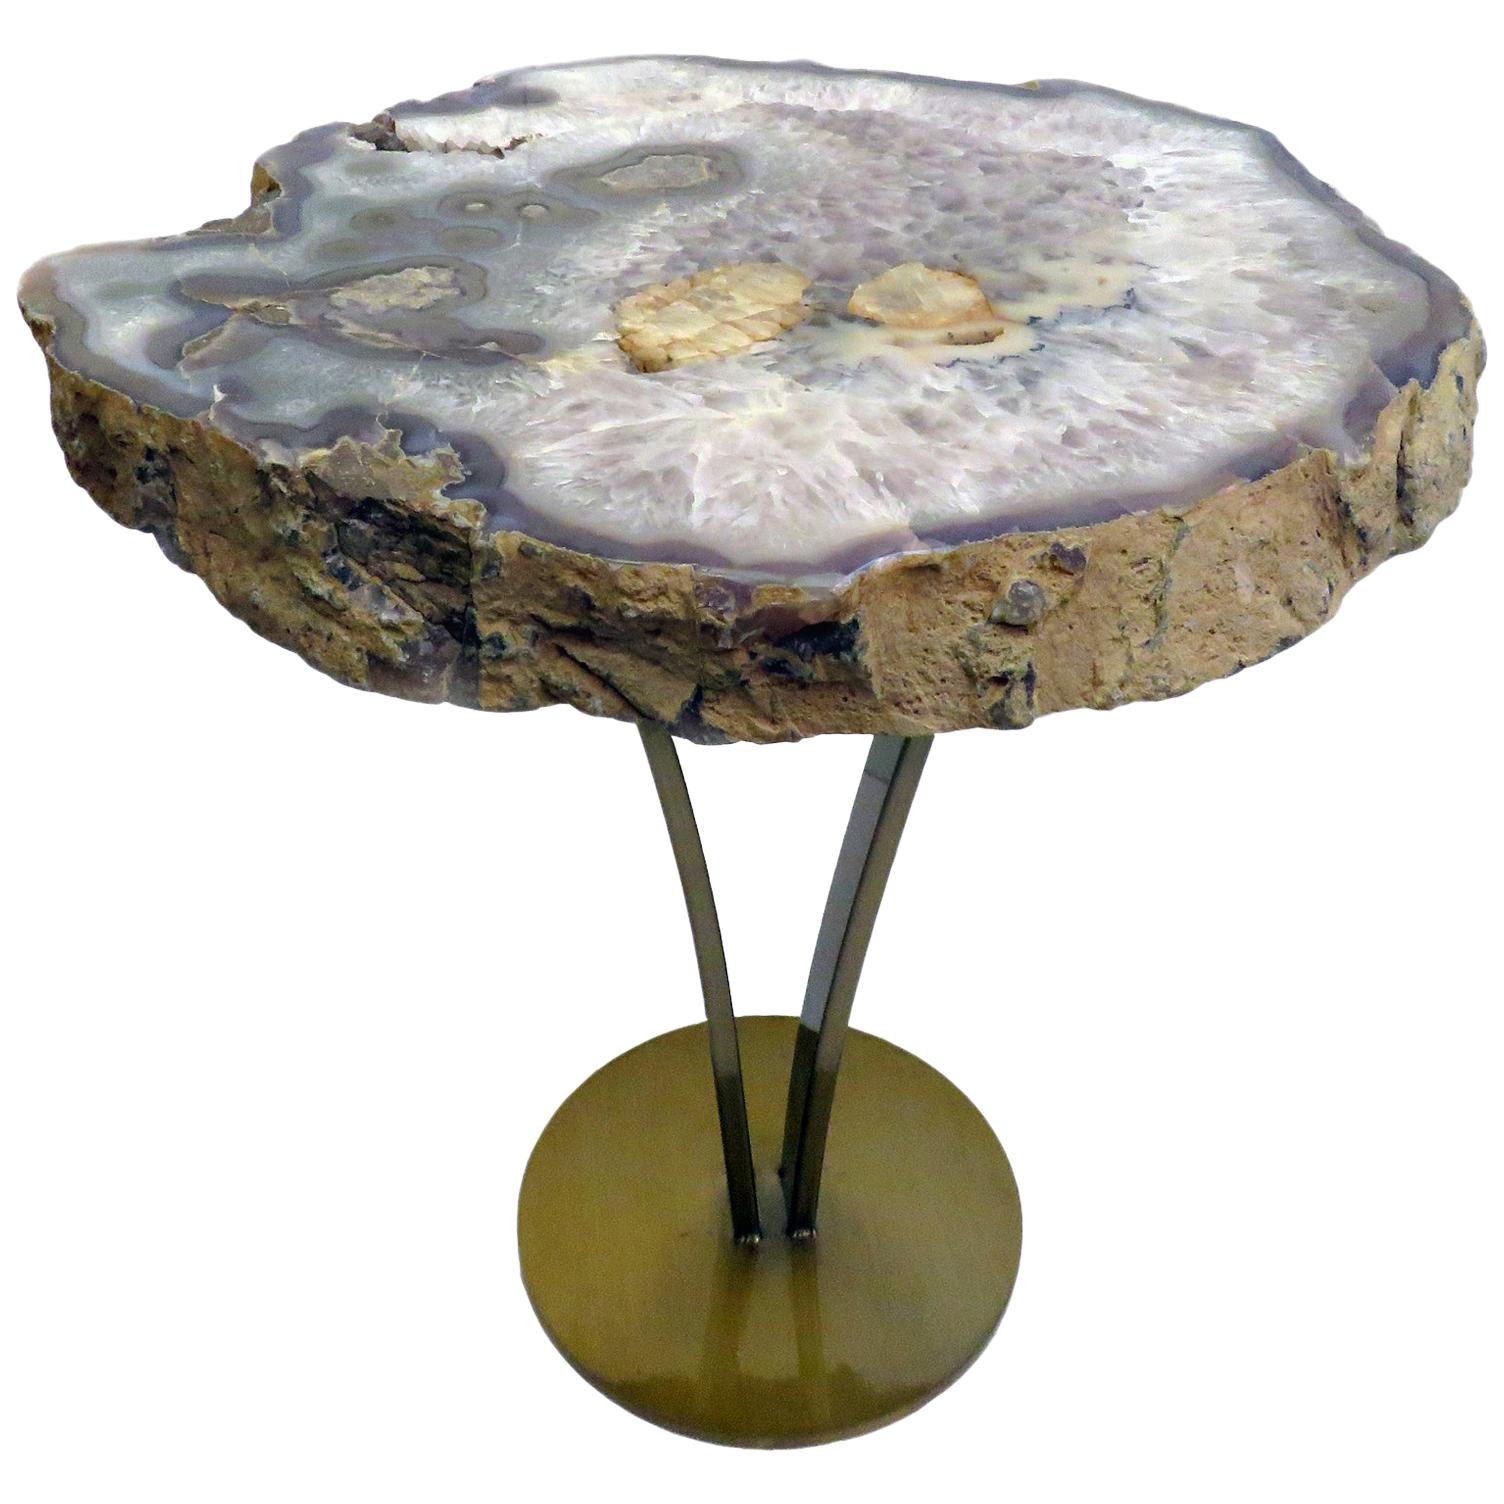 Side or Cocktail Table, Brazilian Agate with Gold Color Metal Base